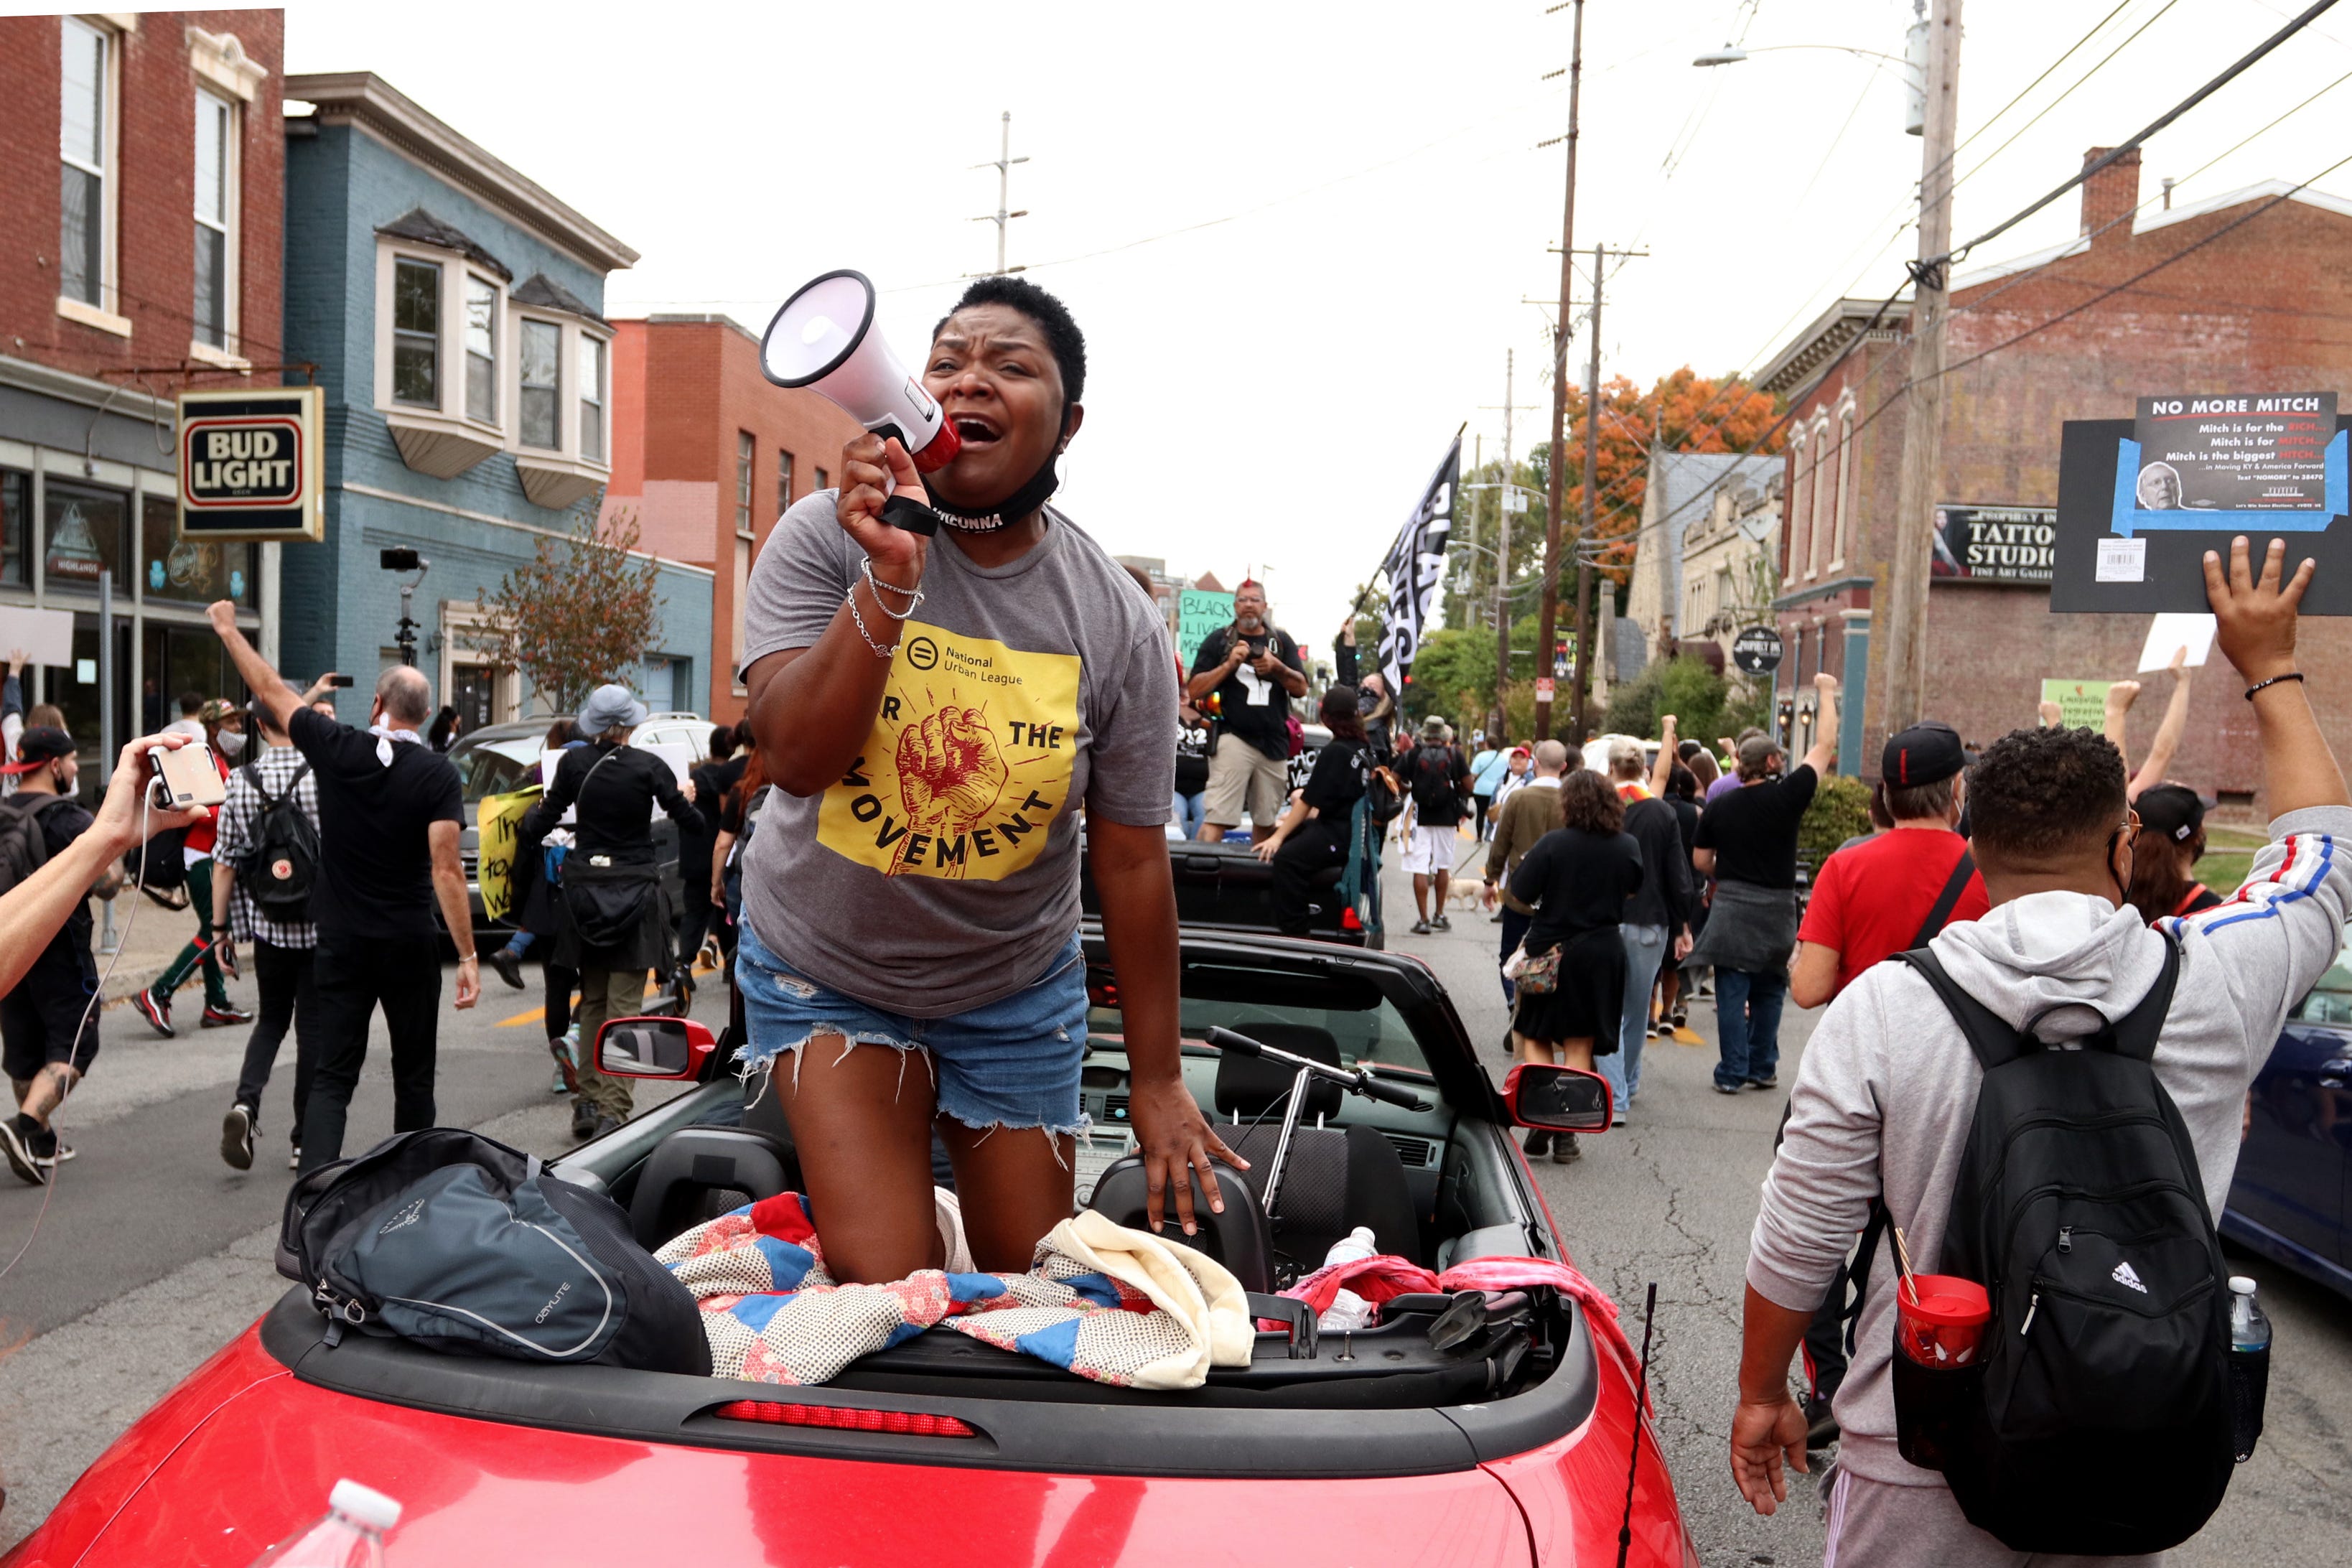 Sadiqa Reynolds, president and CEO of the Louisville Urban League, leads chants from a convertible during a march for Breonna Taylor. Oct. 10, 2020